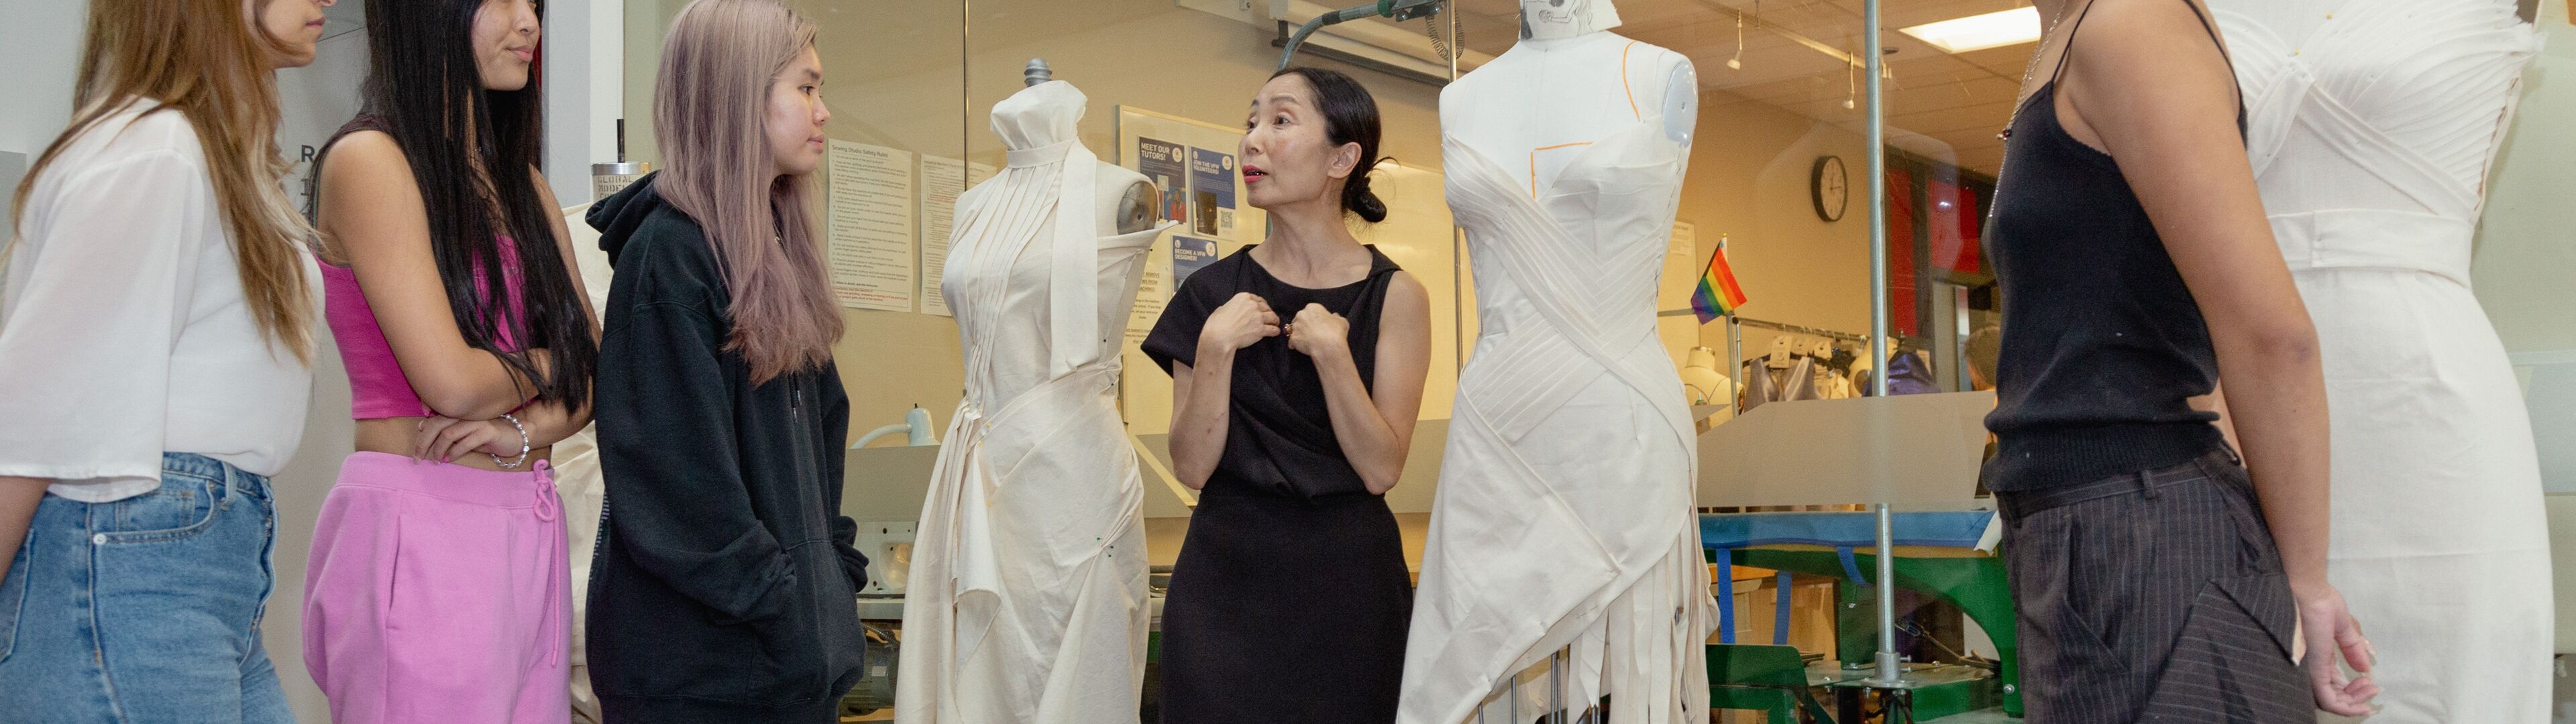 Students attentively listen as their instructor explains garment construction techniques beside mannequins.